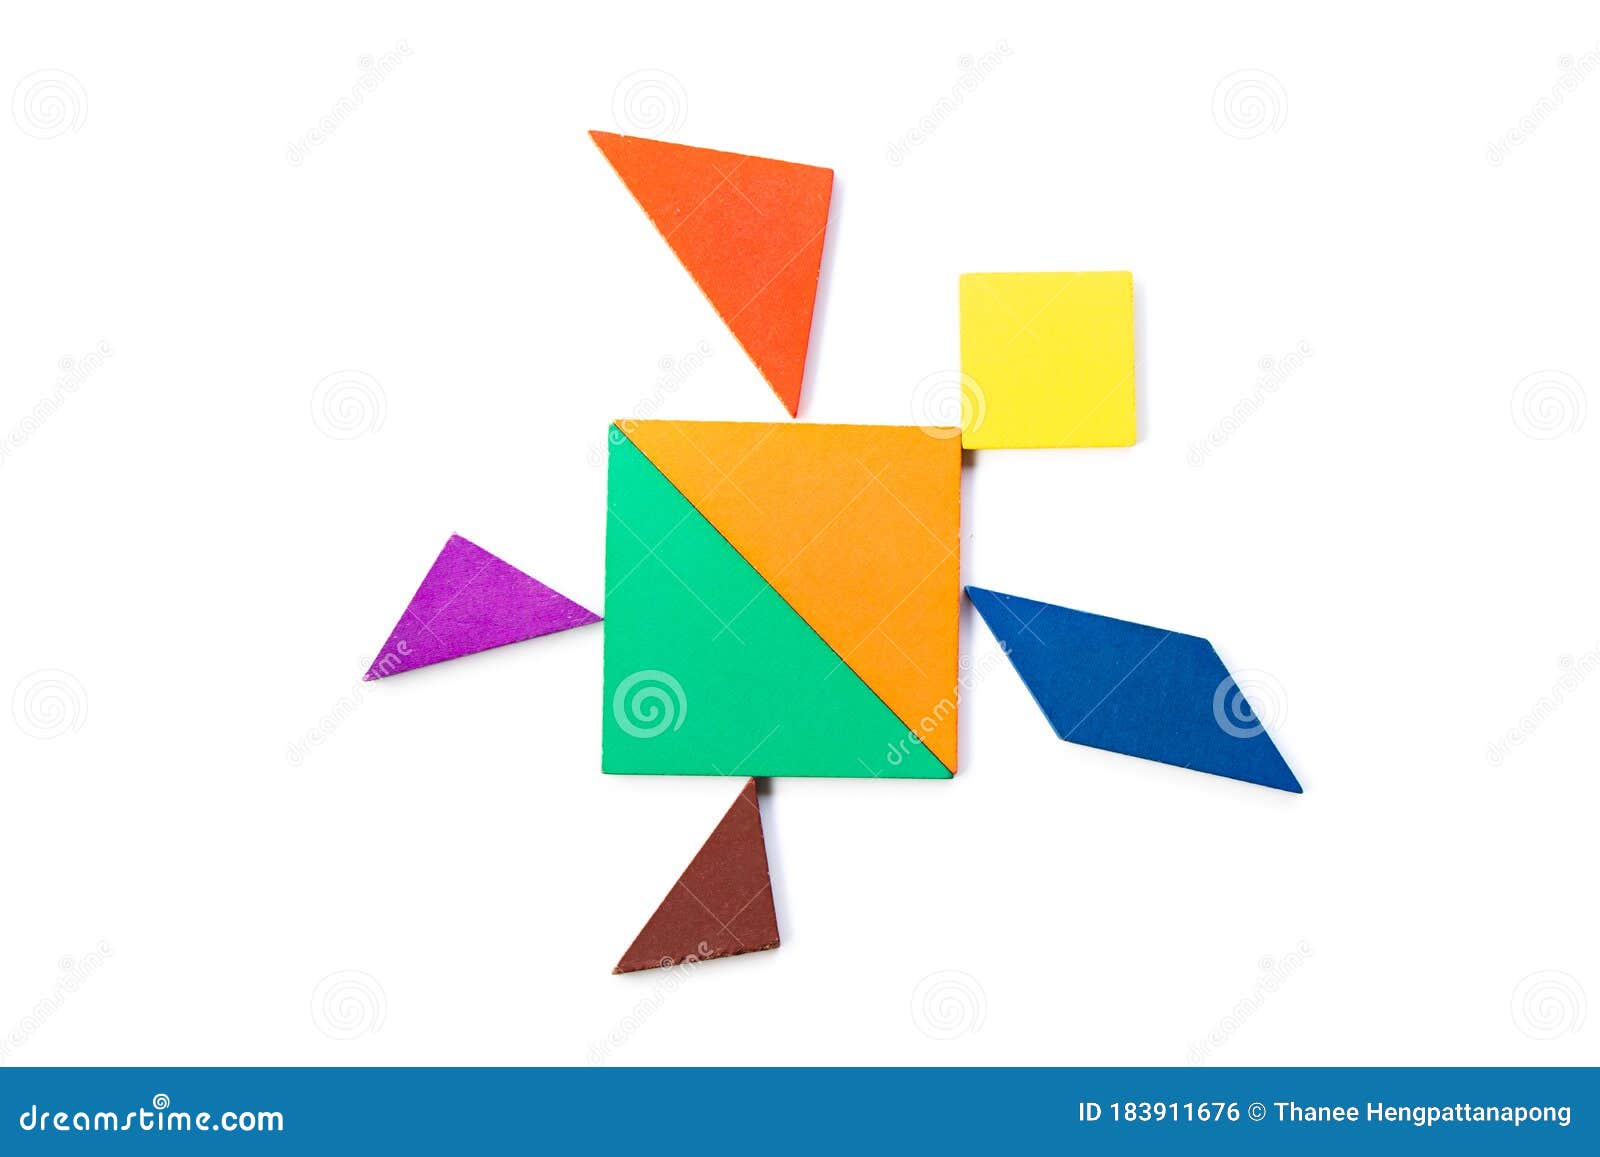 color-tangram-puzzle-in-turtle-terrapin-or-tortoise-shape-on-white